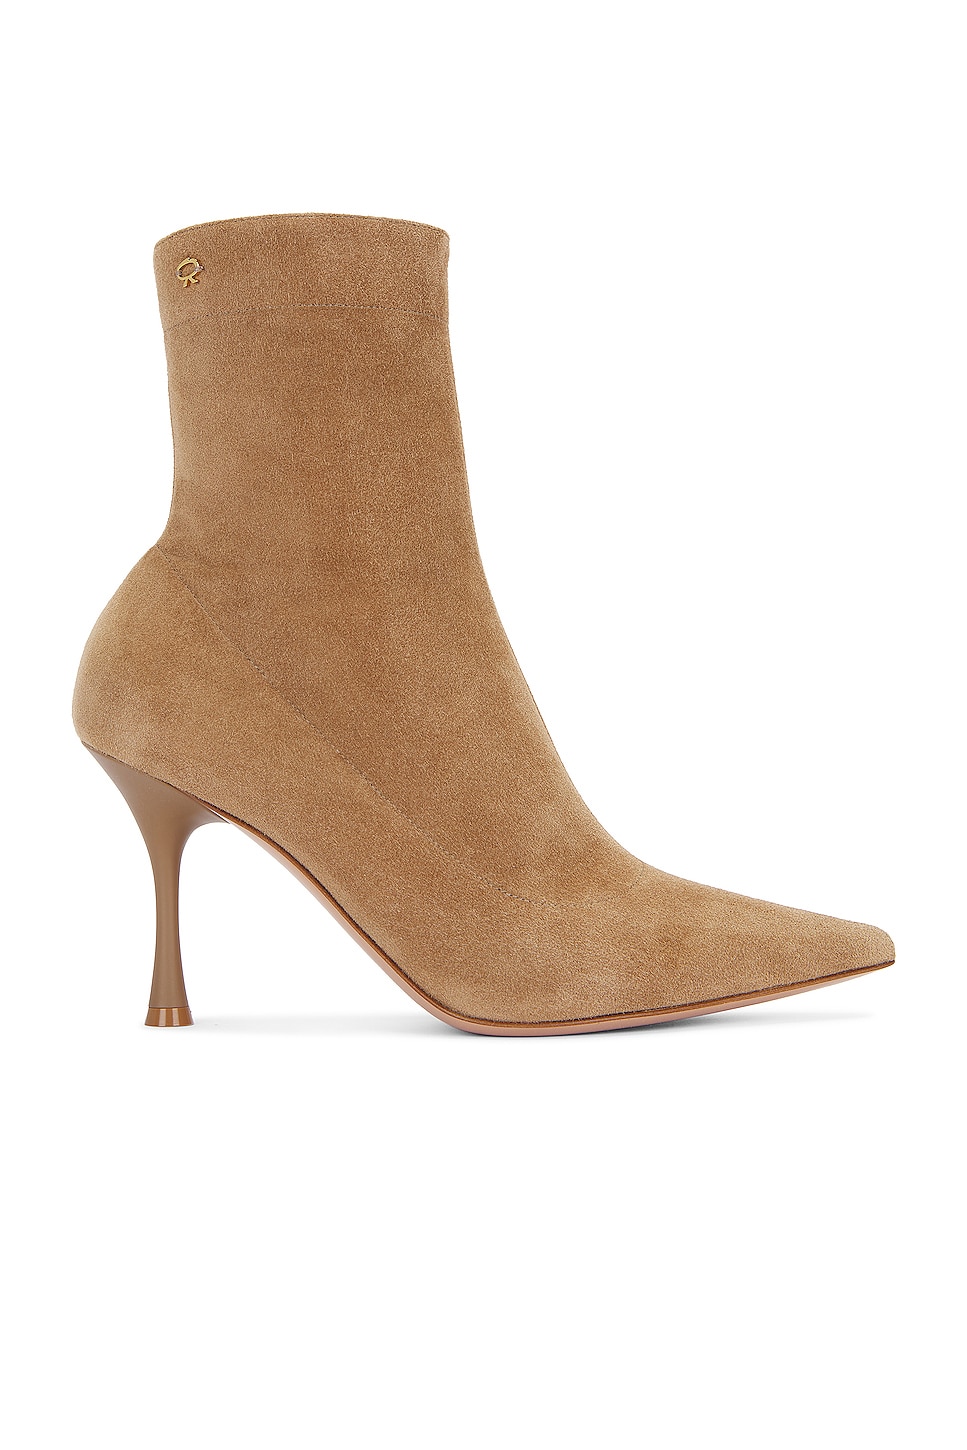 Image 1 of Gianvito Rossi Dunn Boot in Camel